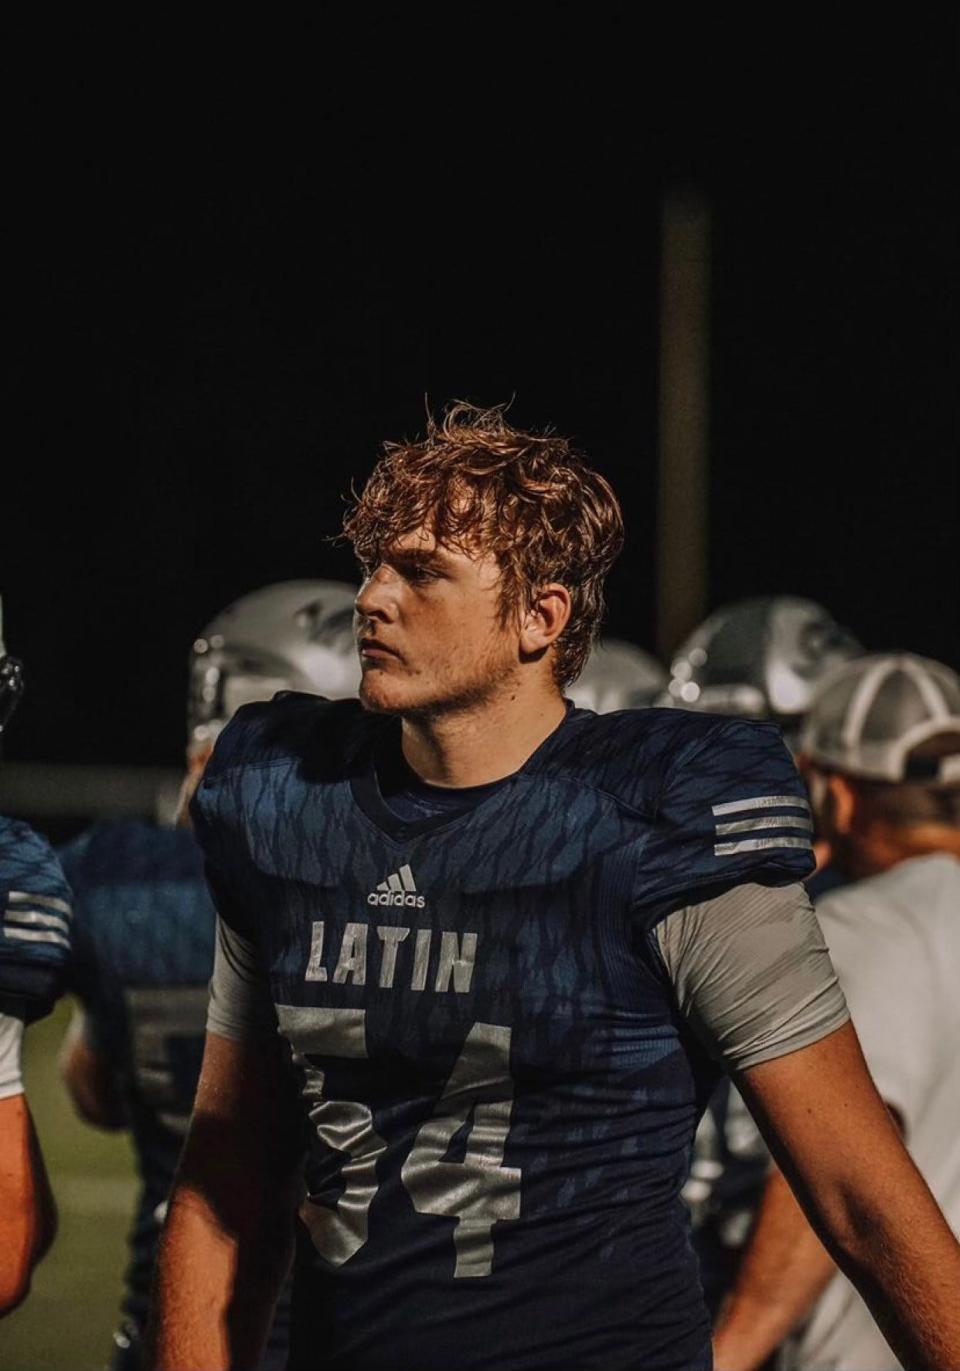 Charlotte Latin's Ben Anderson (54) ranks as one of the top 2022 long snapper prospects in the country, per one recruiting service. But in an evolving college football landscape, opportunities at Power Five programs haven't been as available as the 17-year-old expected.